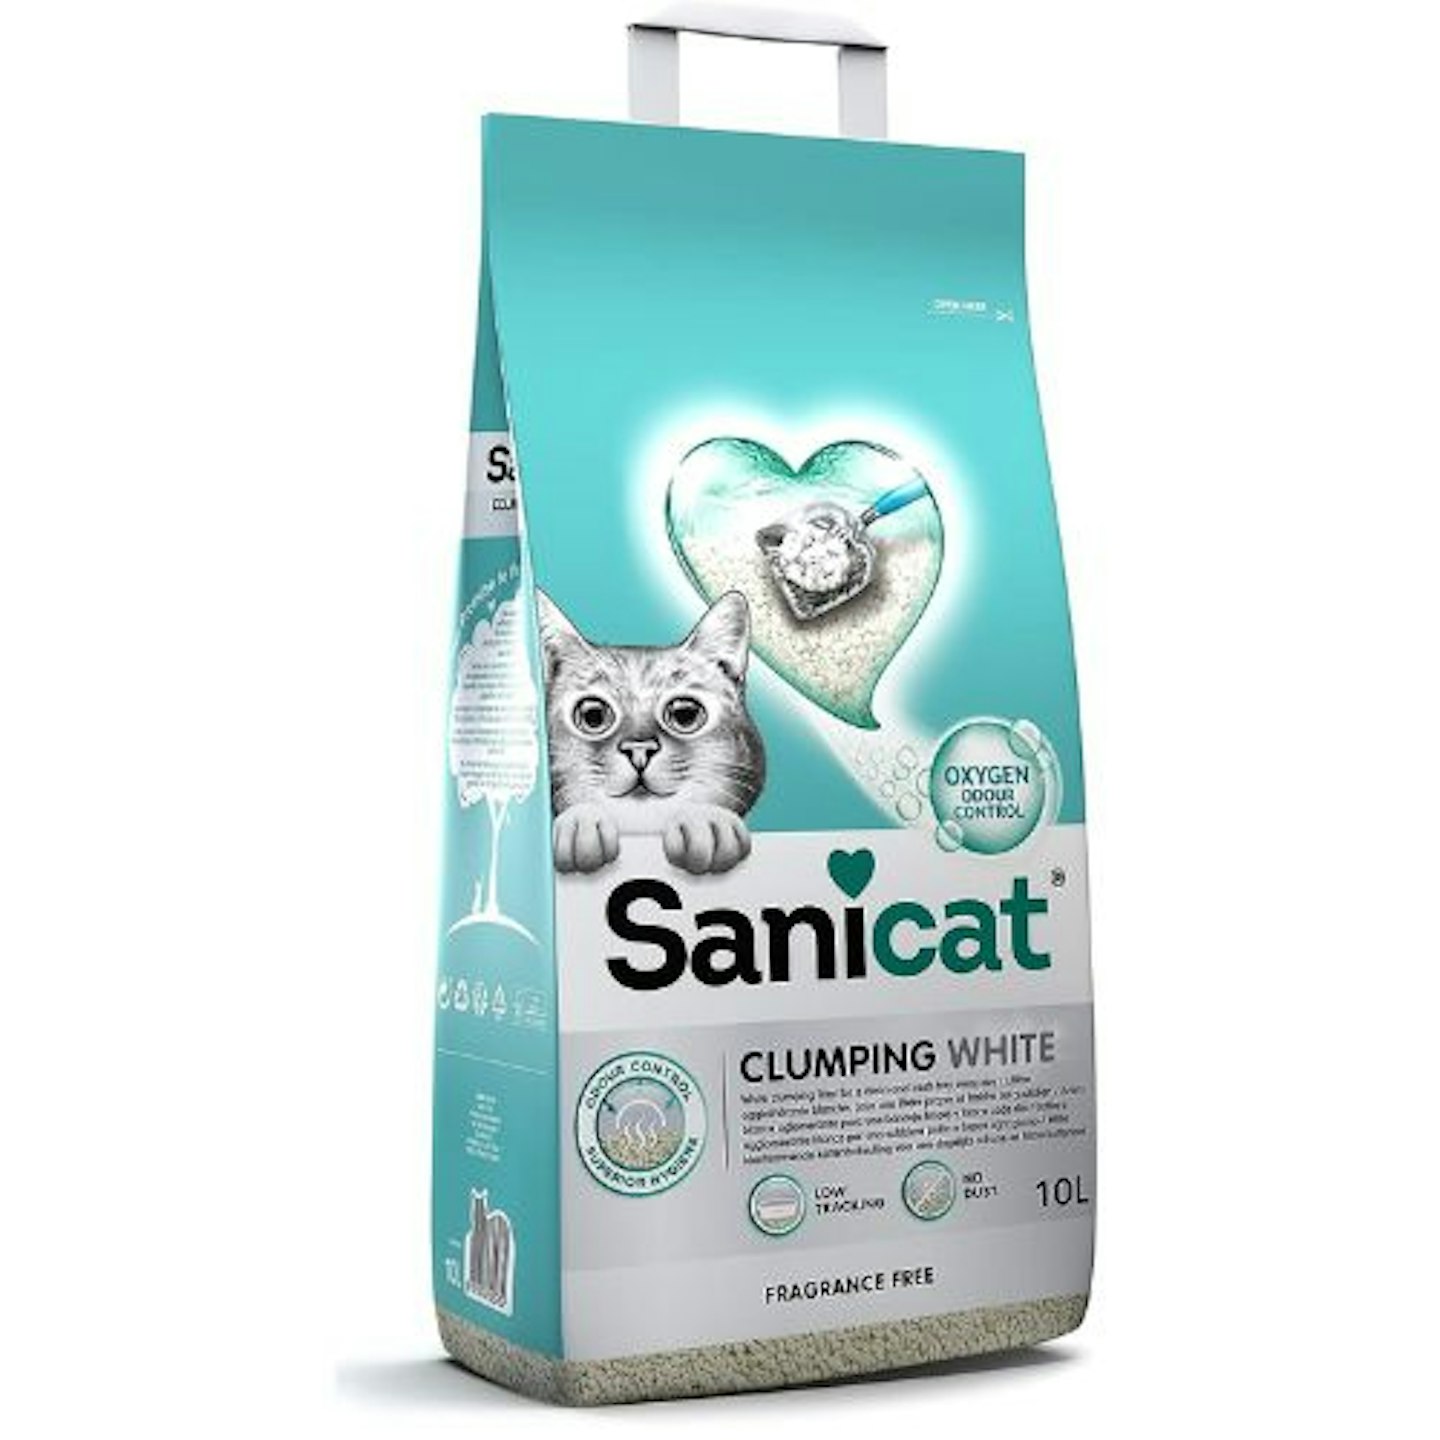 Sanicat - Clumping White Unscented Cat Litter